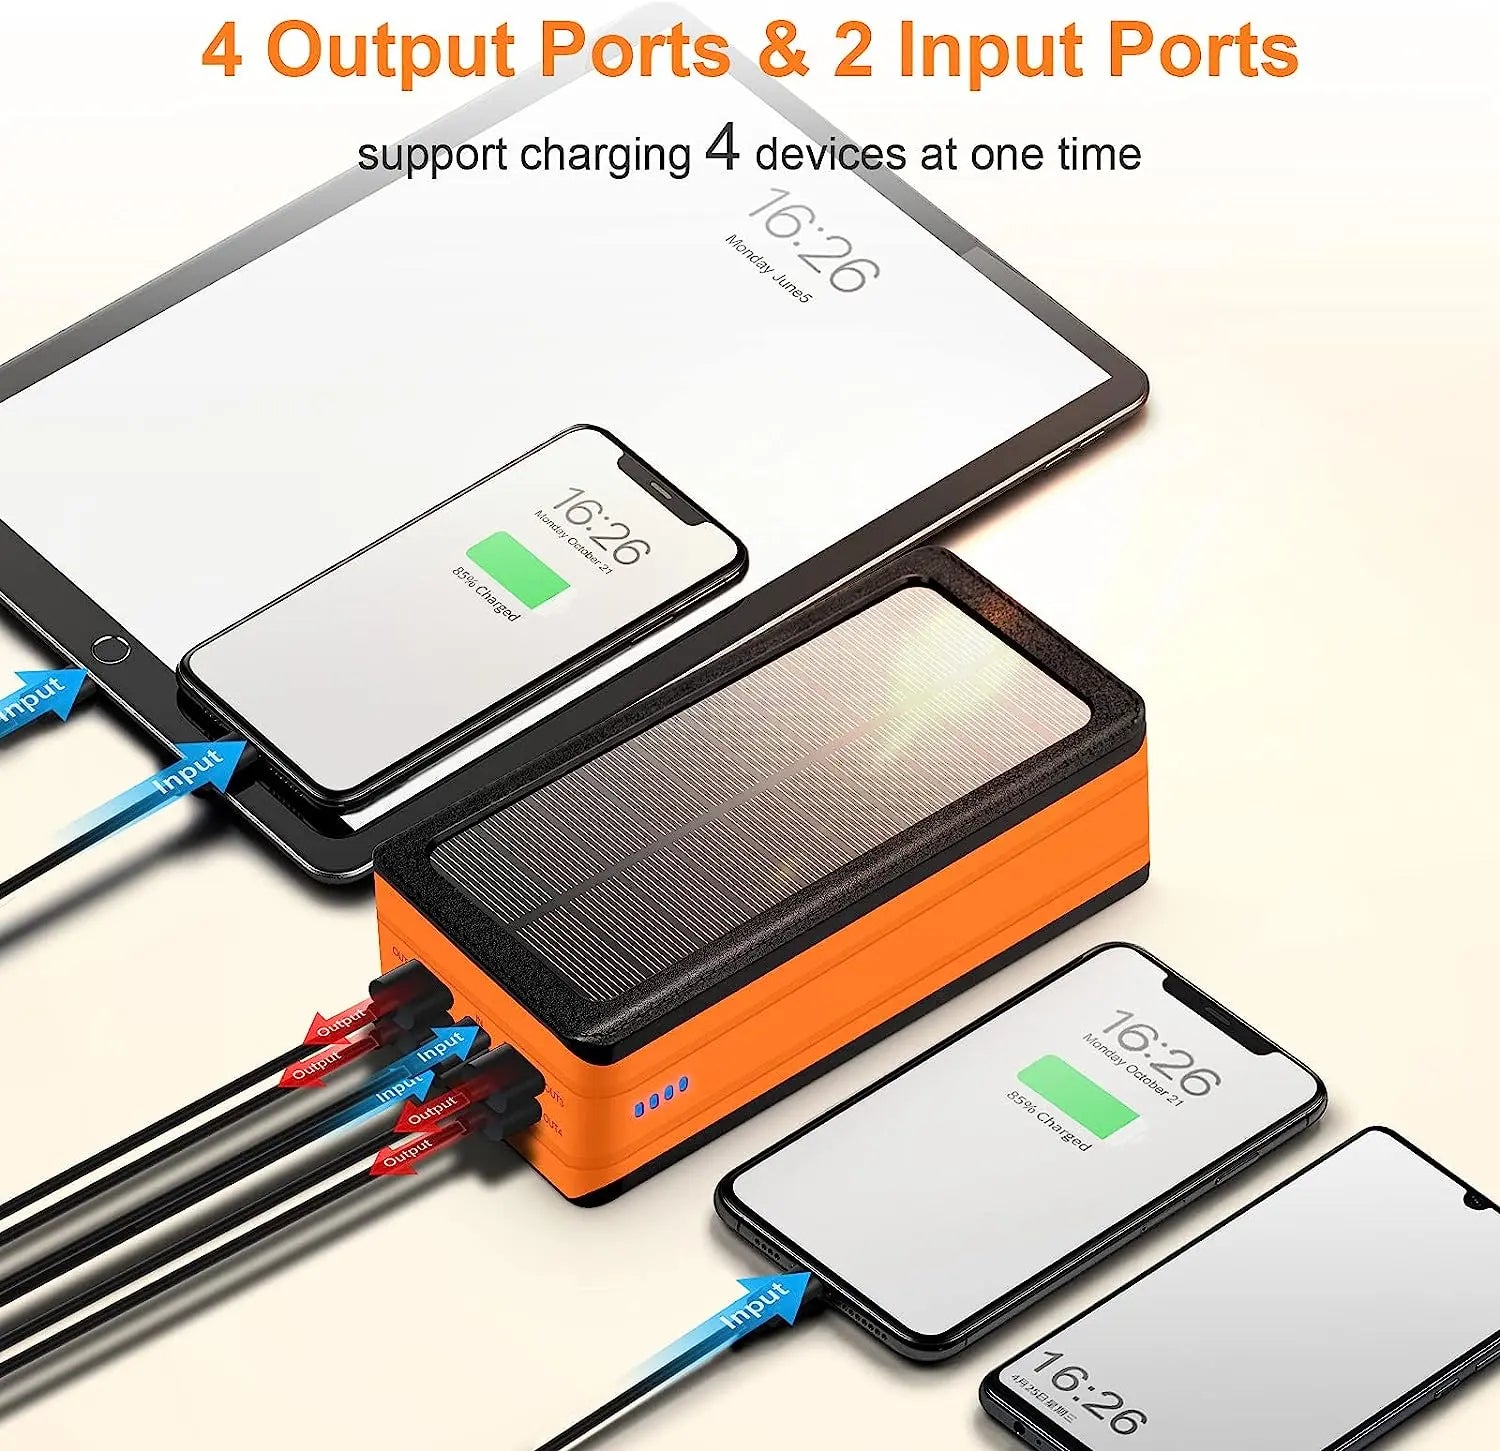 https://www.solarhubstore.com/cdn/shop/files/Solar-Power-Bank-50000Mah_-Portable-Solar-Phone-Charger-with-Flashlight_-4-Output-Ports_-2-Input-Ports_-Solar-Battery-Bank-Compatible-with-Iphone-for-Camping_-Hiking_-Trips-PSOOO-1693_feea1cbd-0966-4470-9a03-d4f3271d0f86.jpg?v=1693235390&width=1500